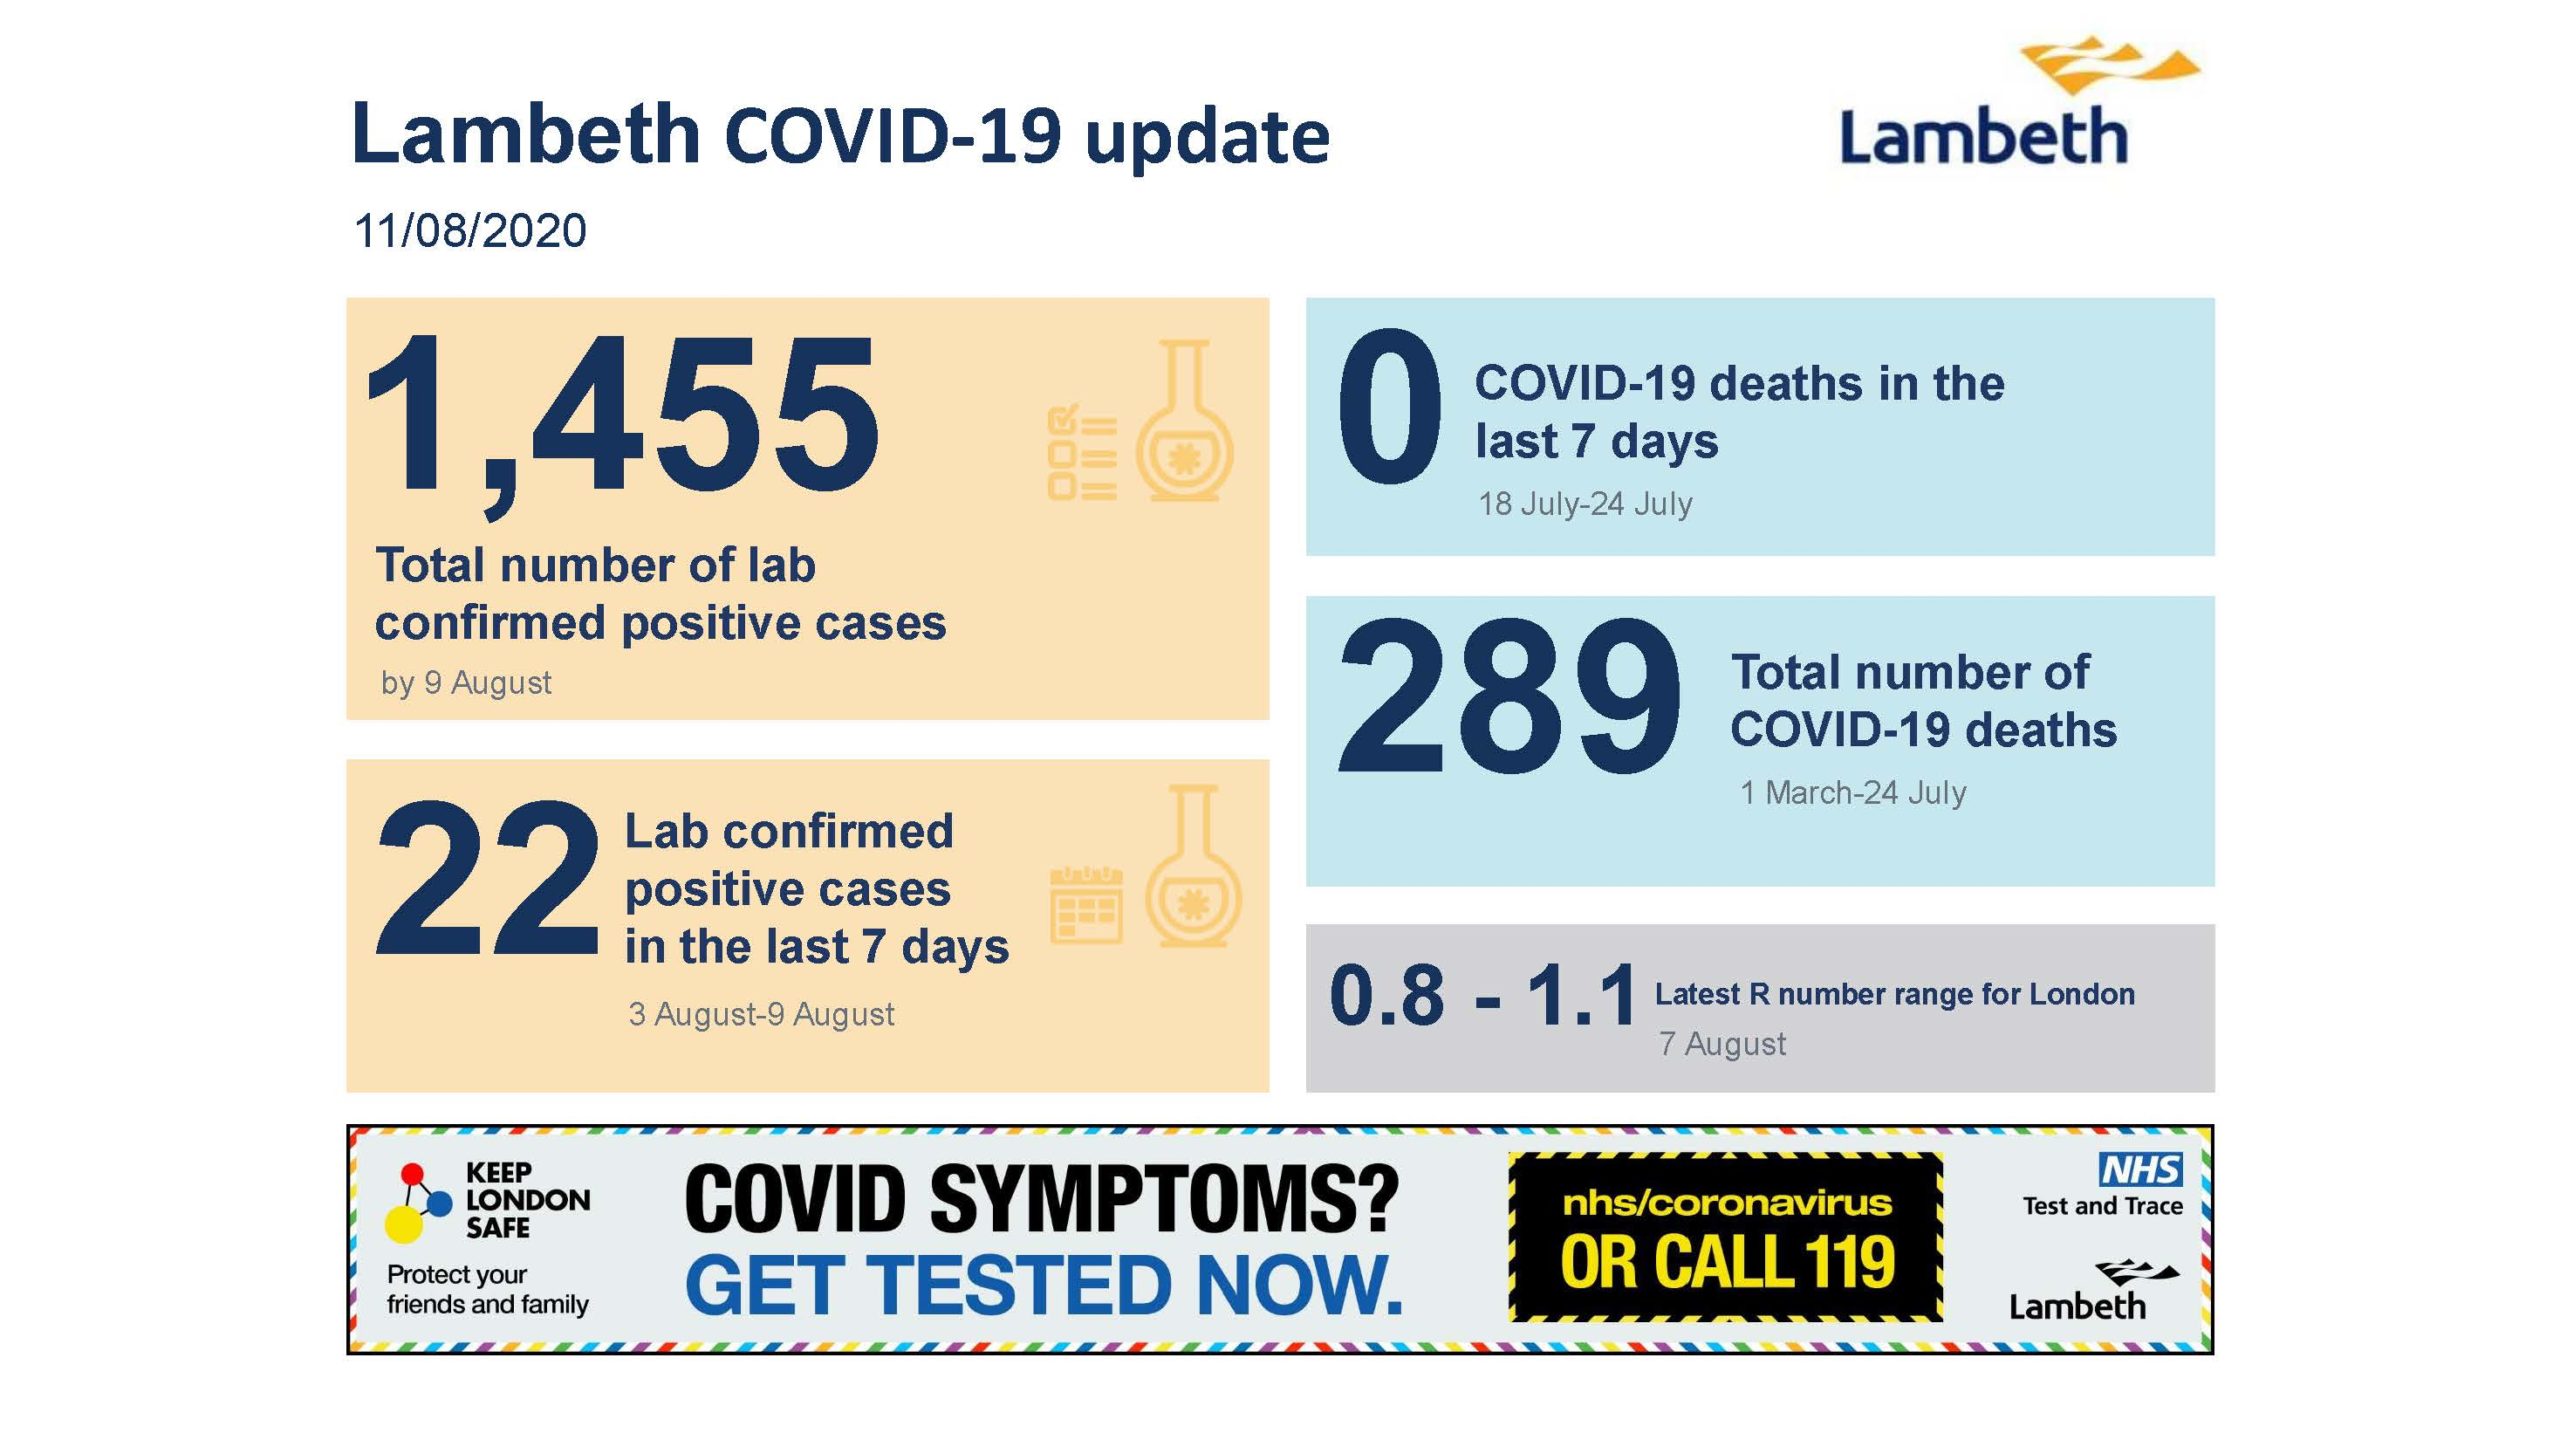 Let’s act together to stop the spread of Covid-19